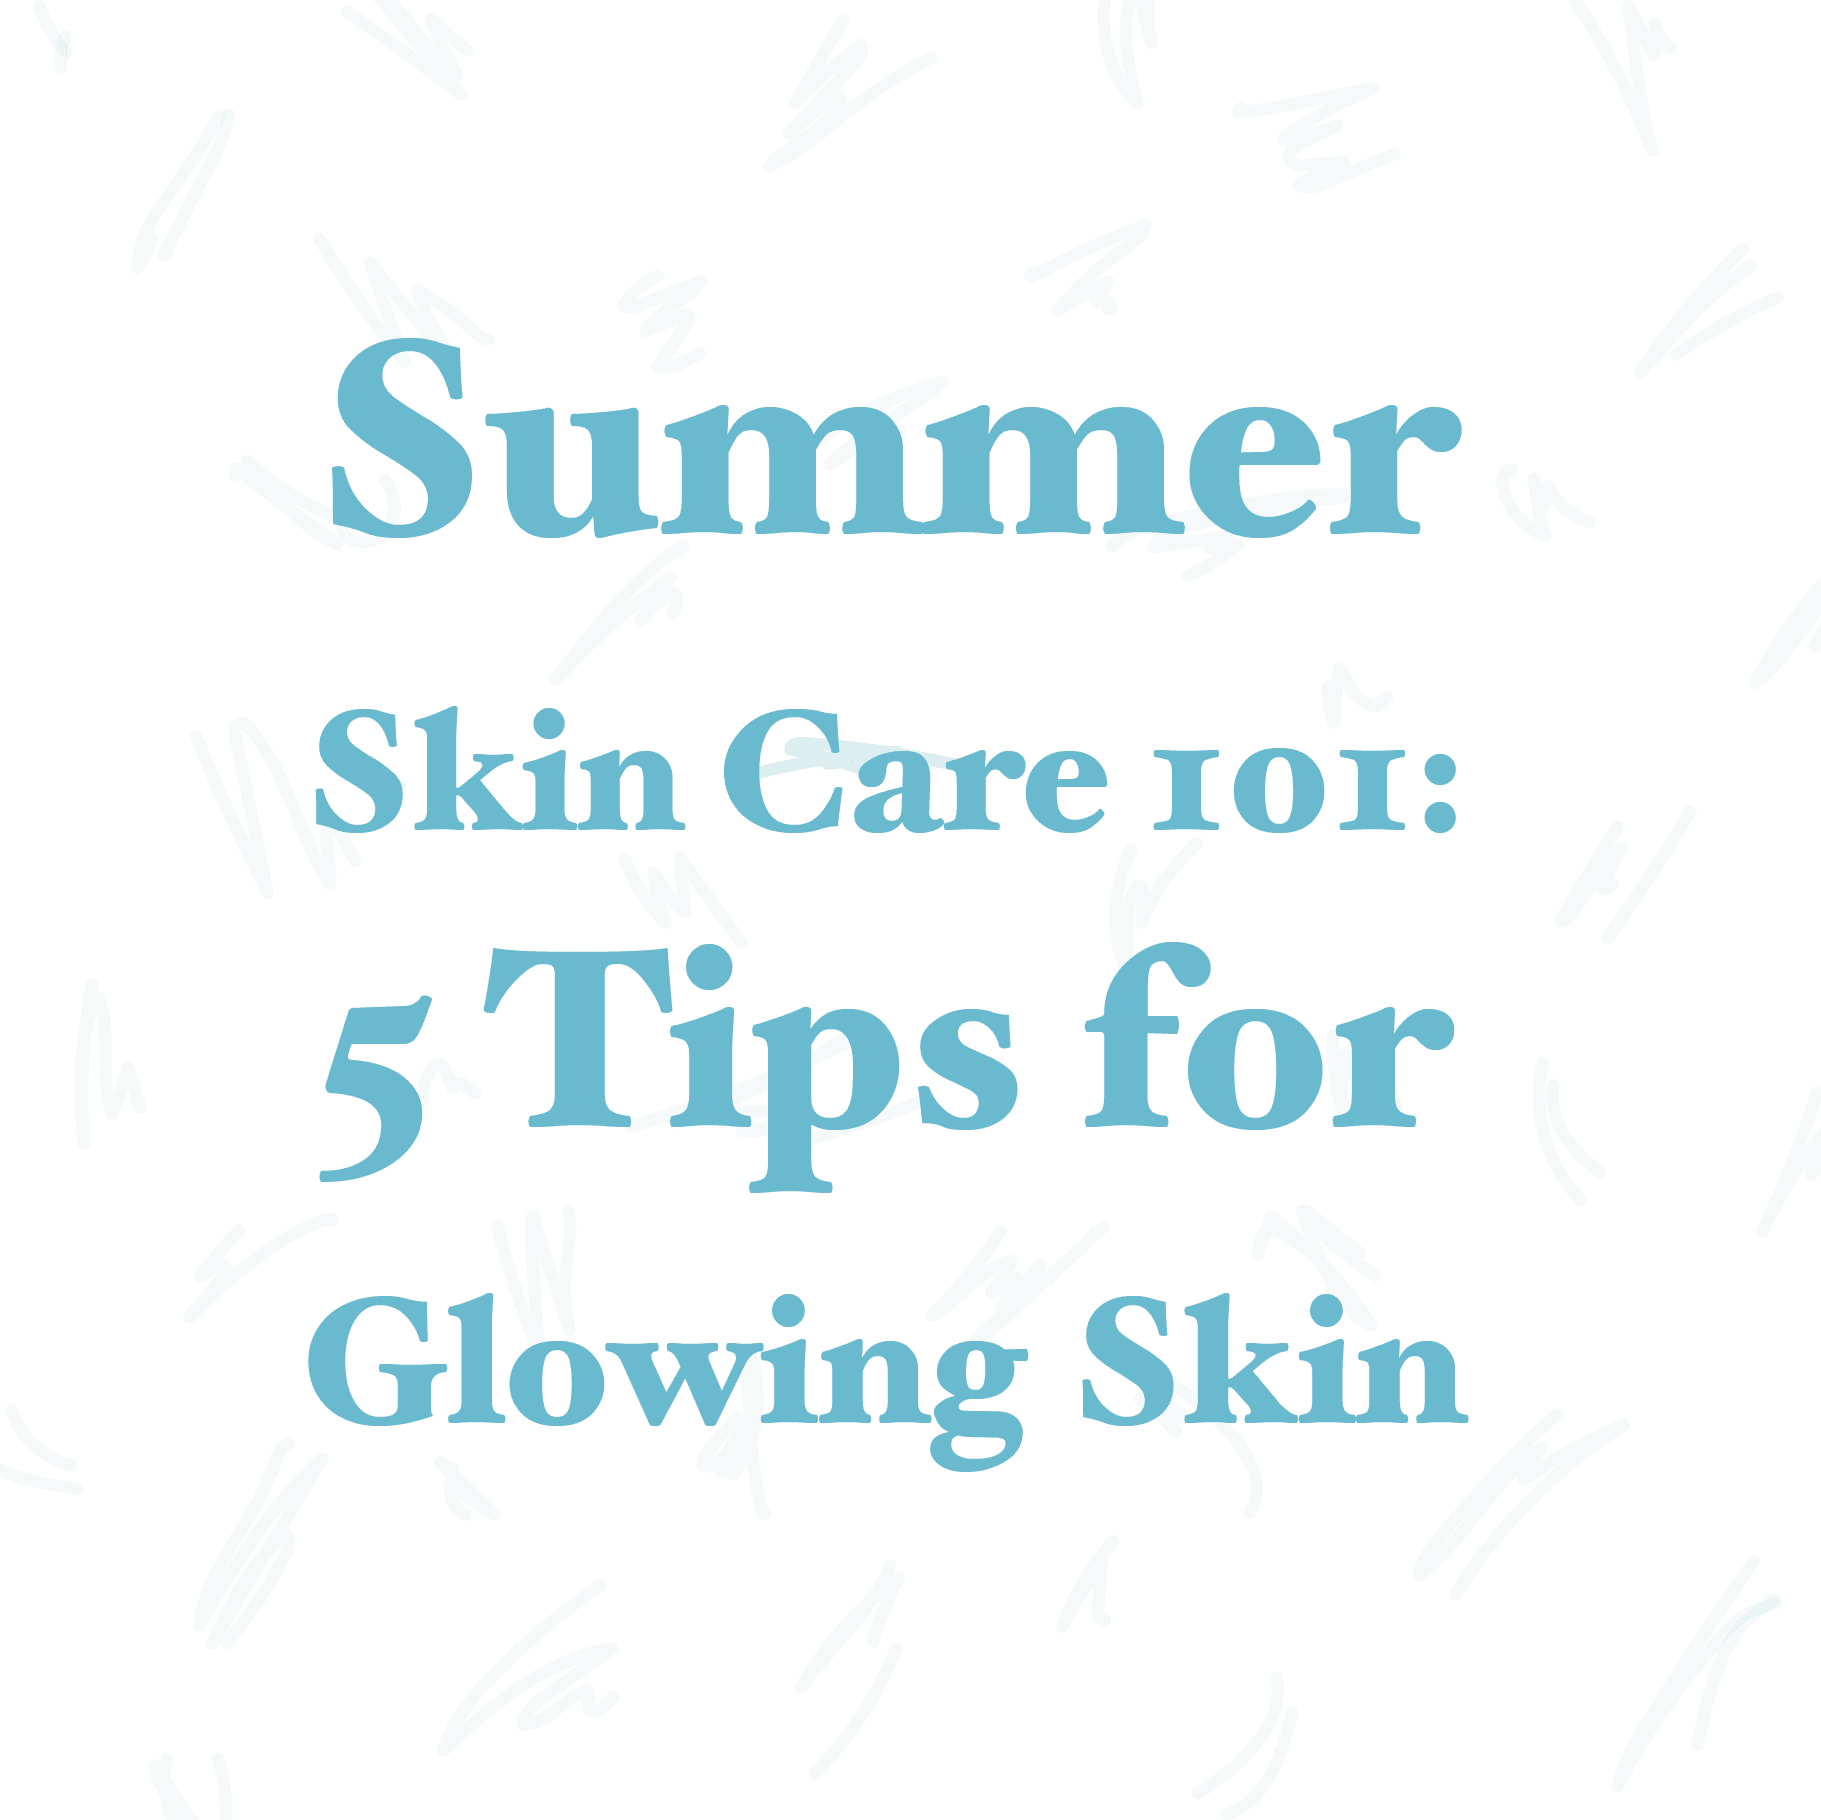 Summer Skin Care 101: 5 Tips for Glowing Skin - AURA Nutrition